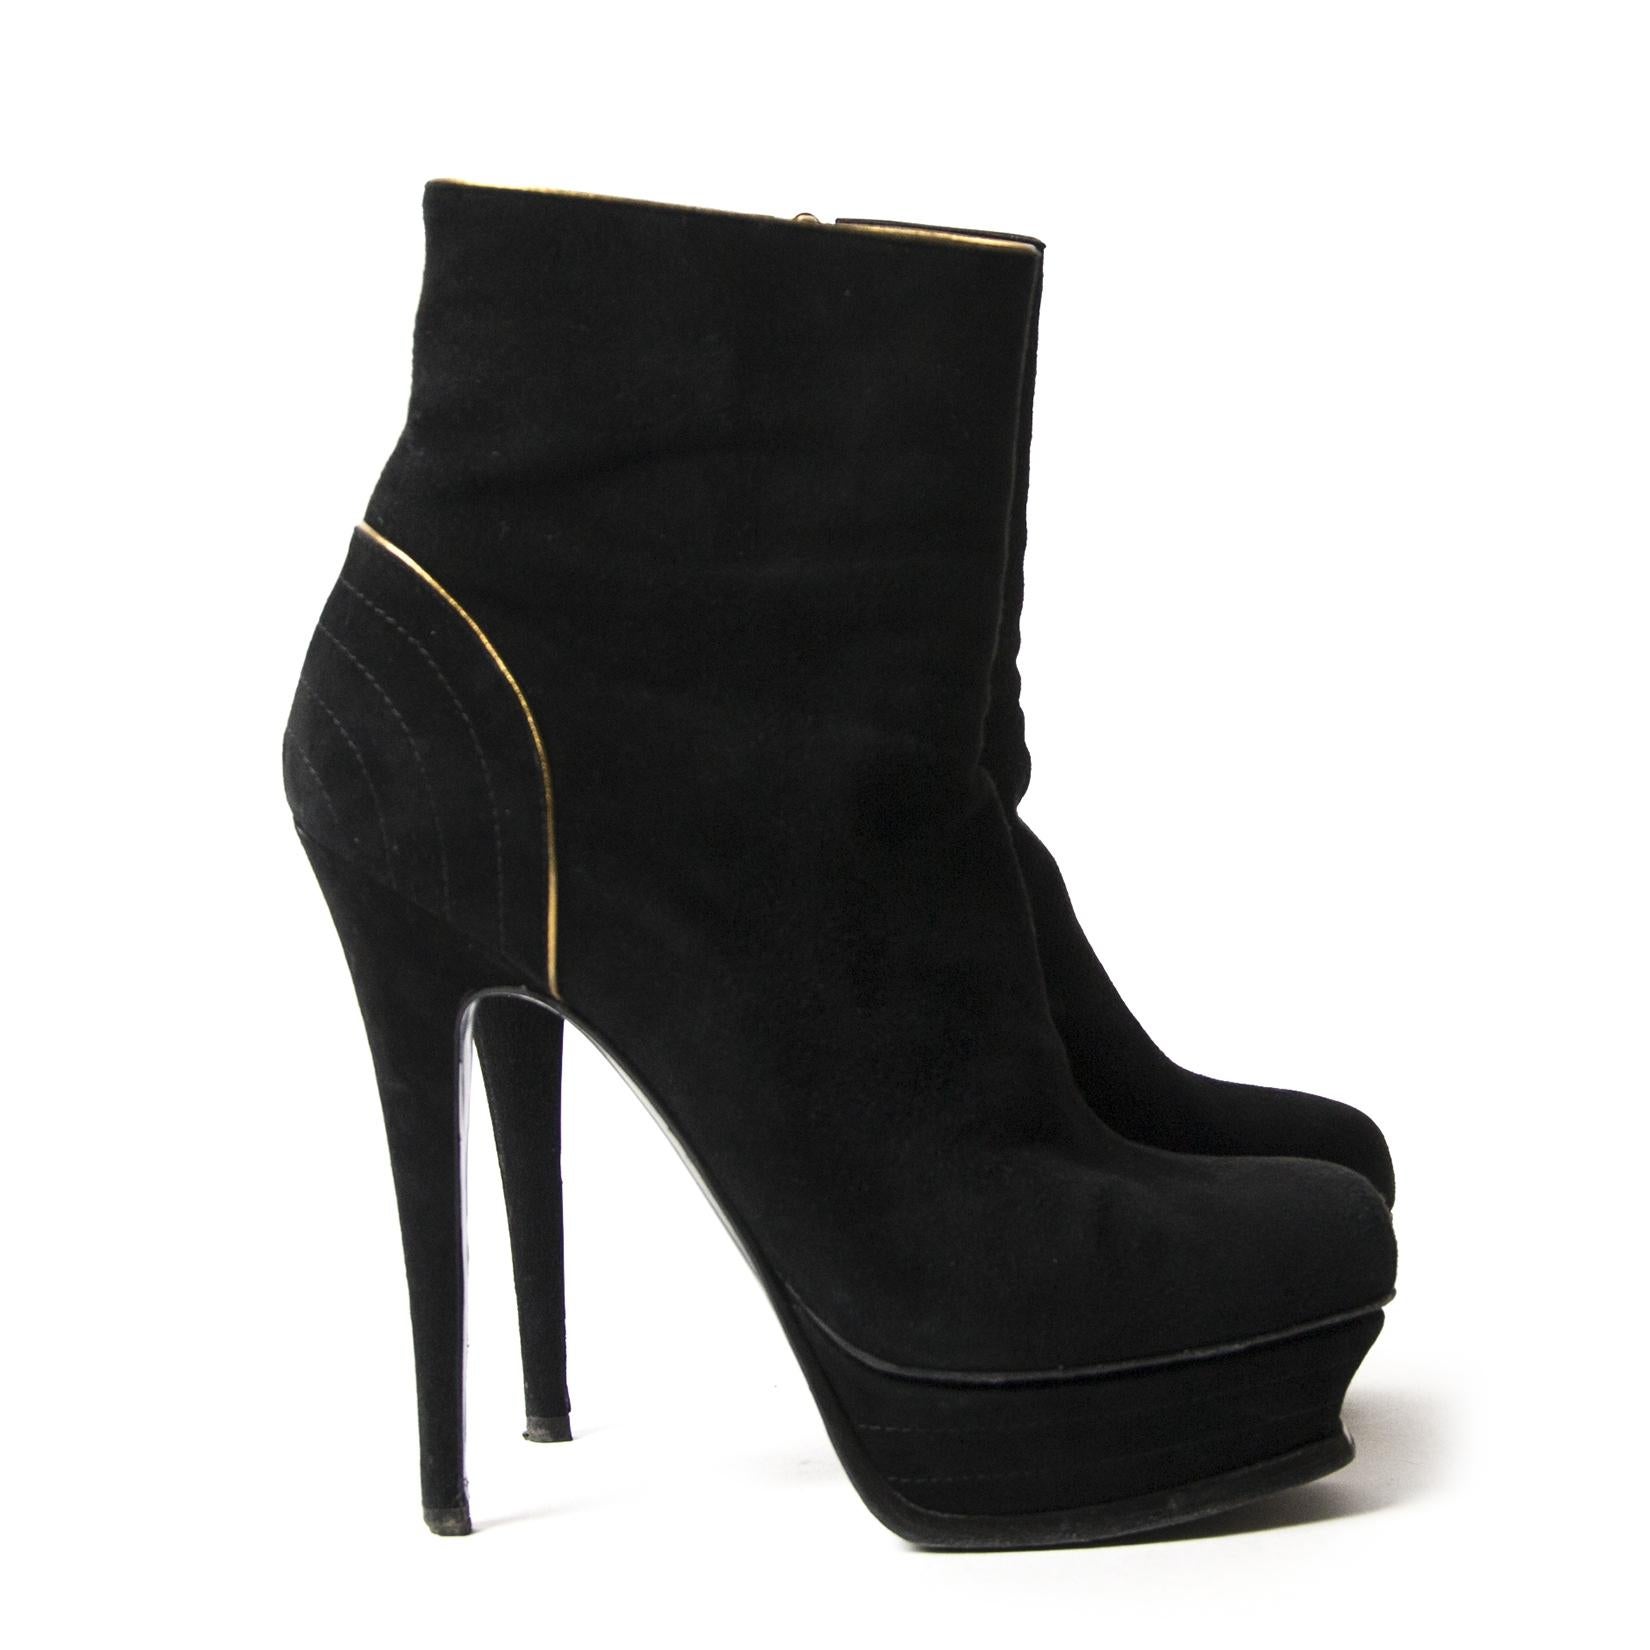 Saint Laurent Black Suede Boots - Size 37, 5 In Excellent Condition For Sale In Antwerp, BE